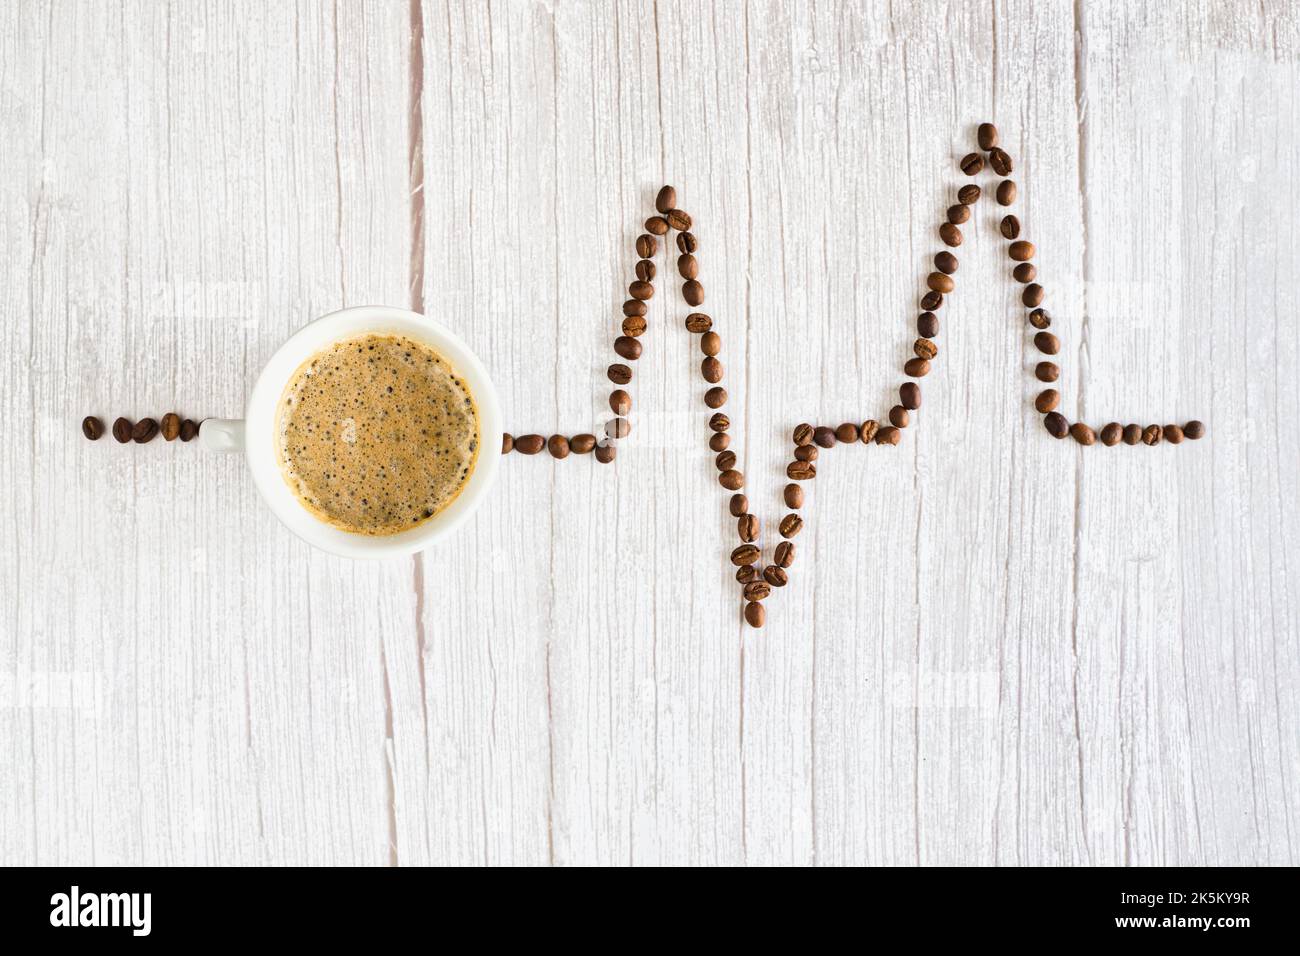 Espresso coffee on table with coffee beans like heart rhythm Stock Photo